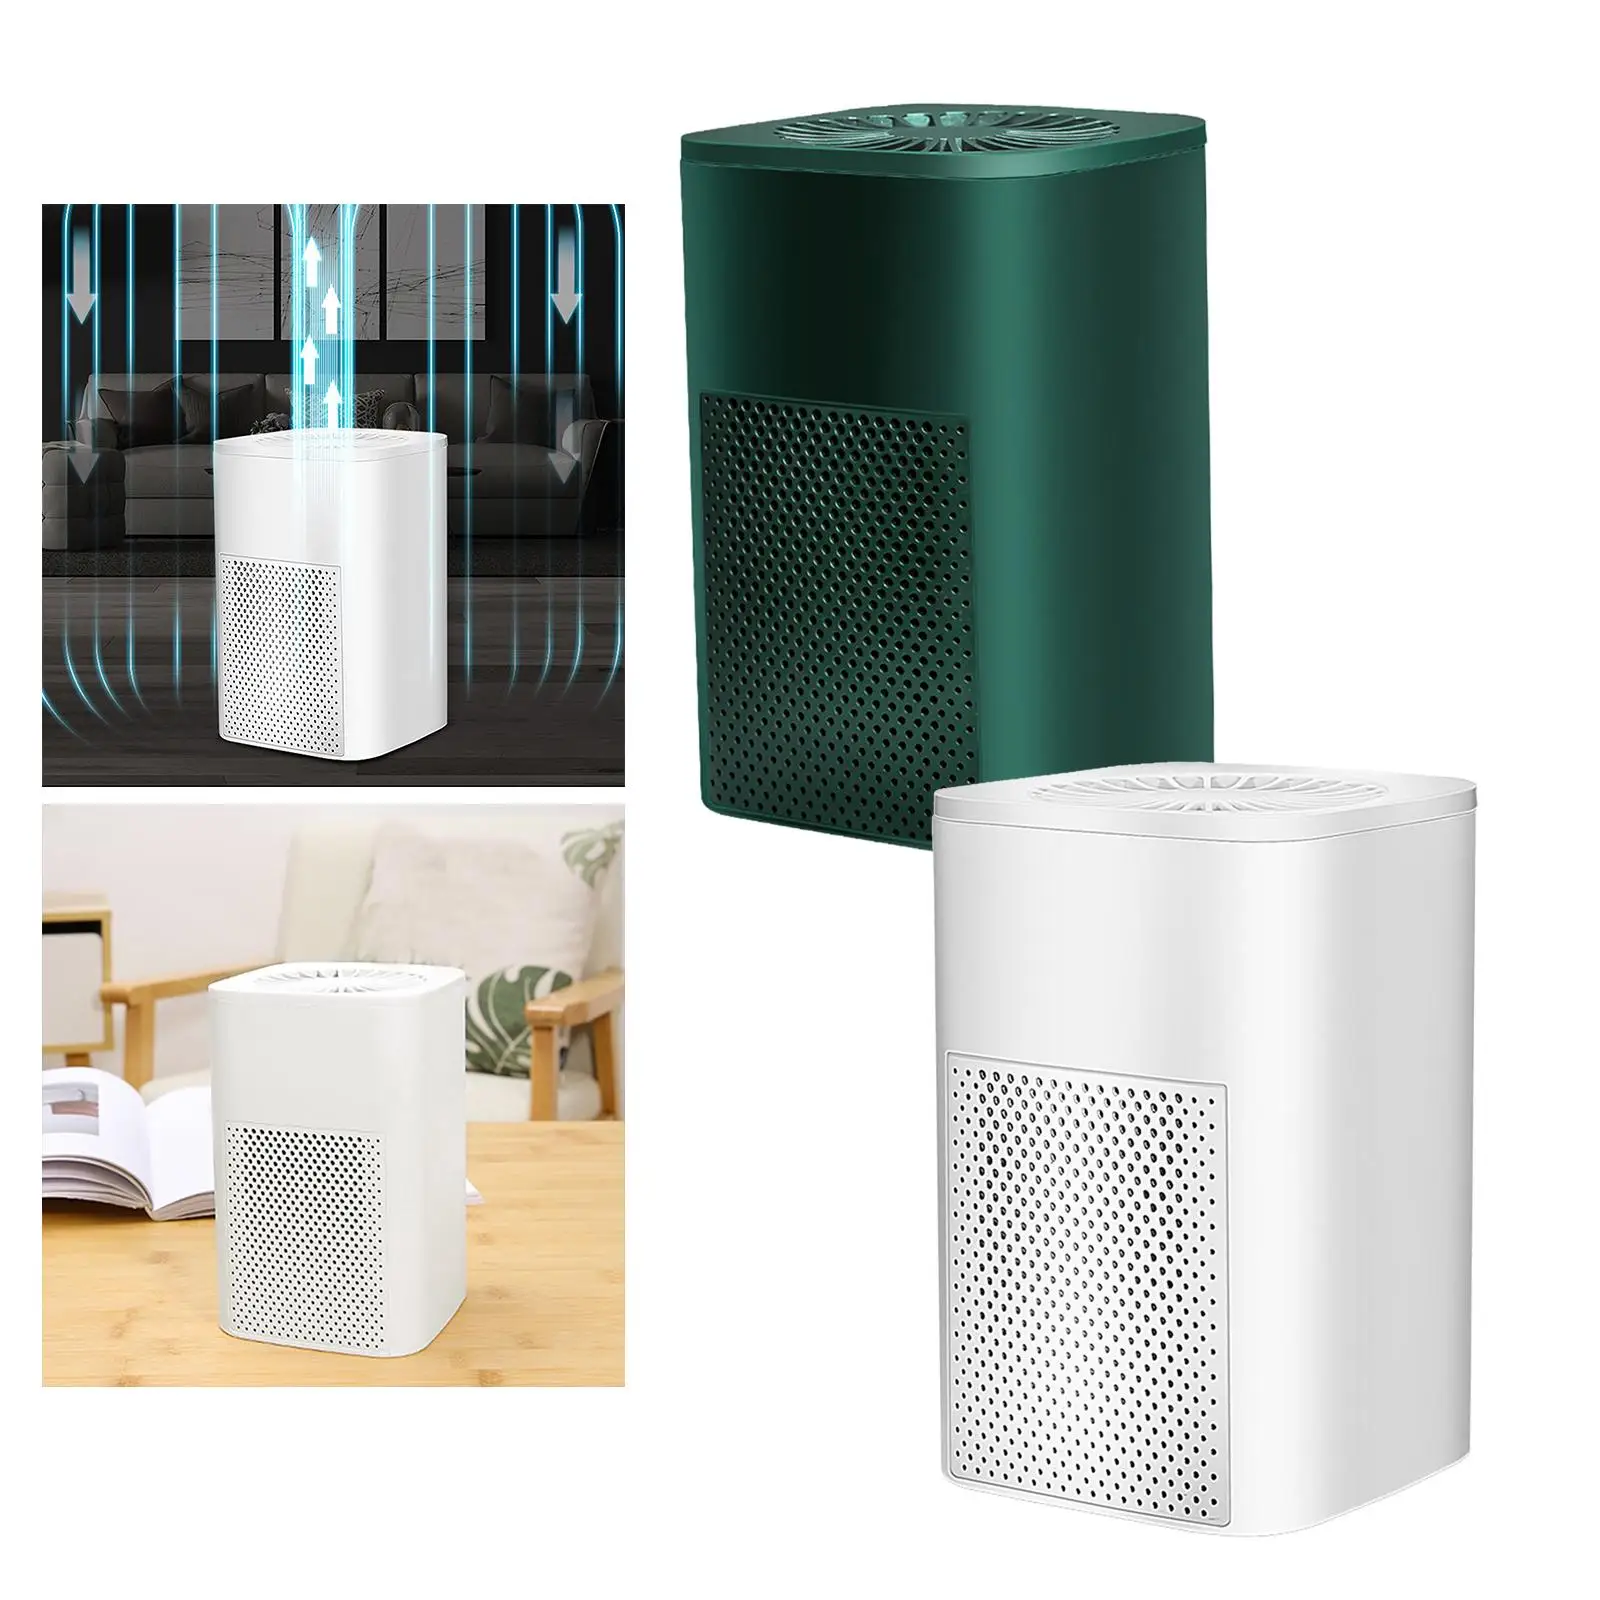 Mini Air Purifier USB Powered 35dB 2 Layer Activated Carbon Quiet Desktop Home Air Cleaner Removes Smoke Germs Particles Dust